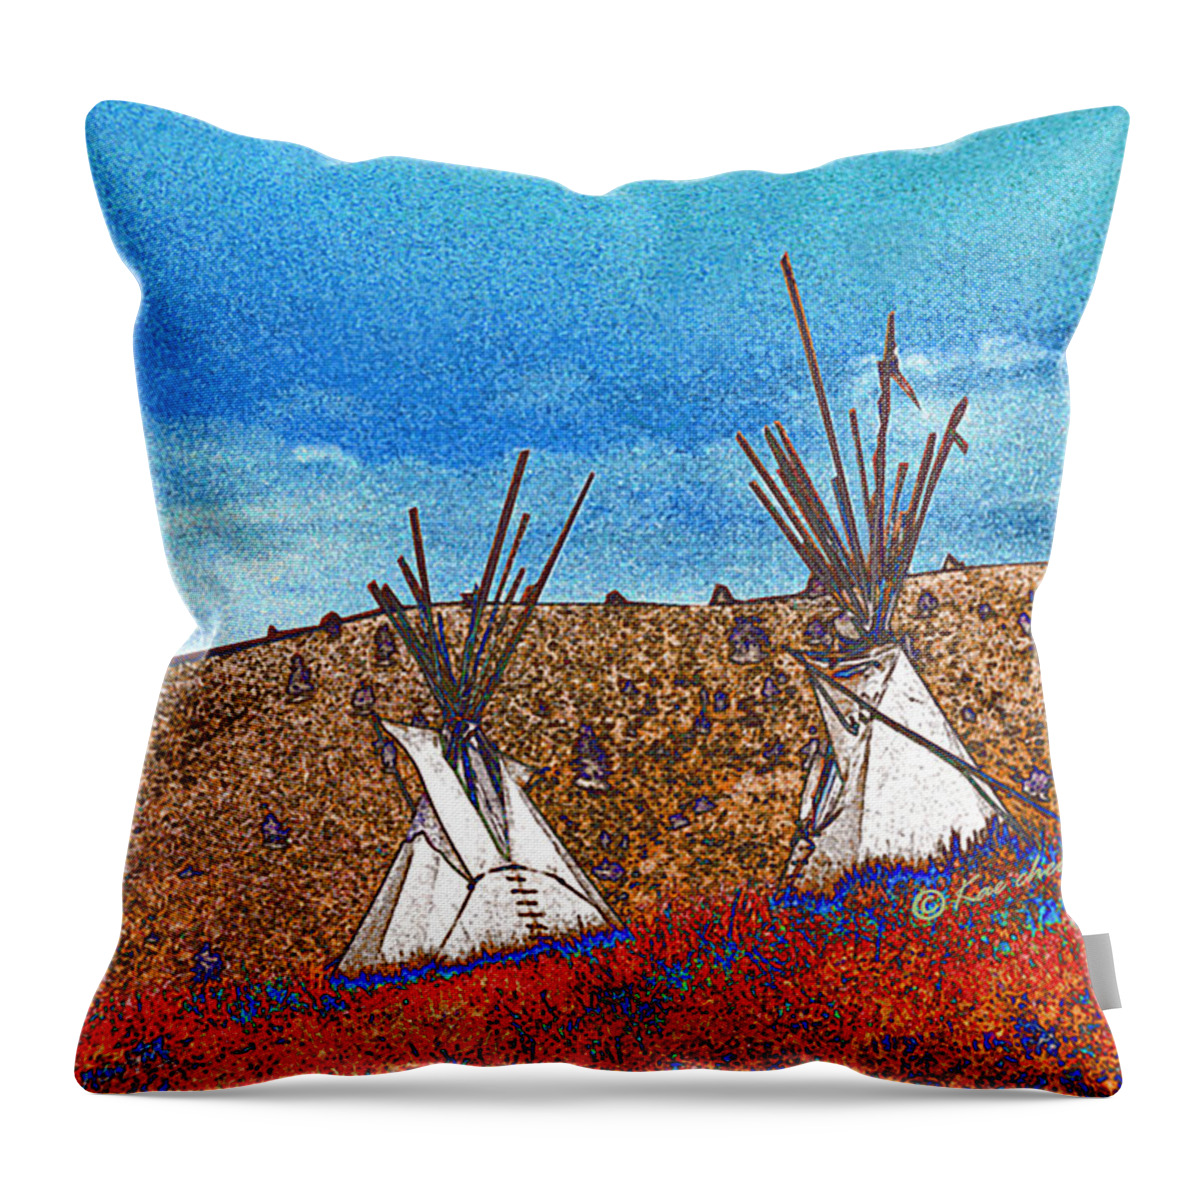 American Indian Throw Pillow featuring the photograph Two Teepees by Kae Cheatham